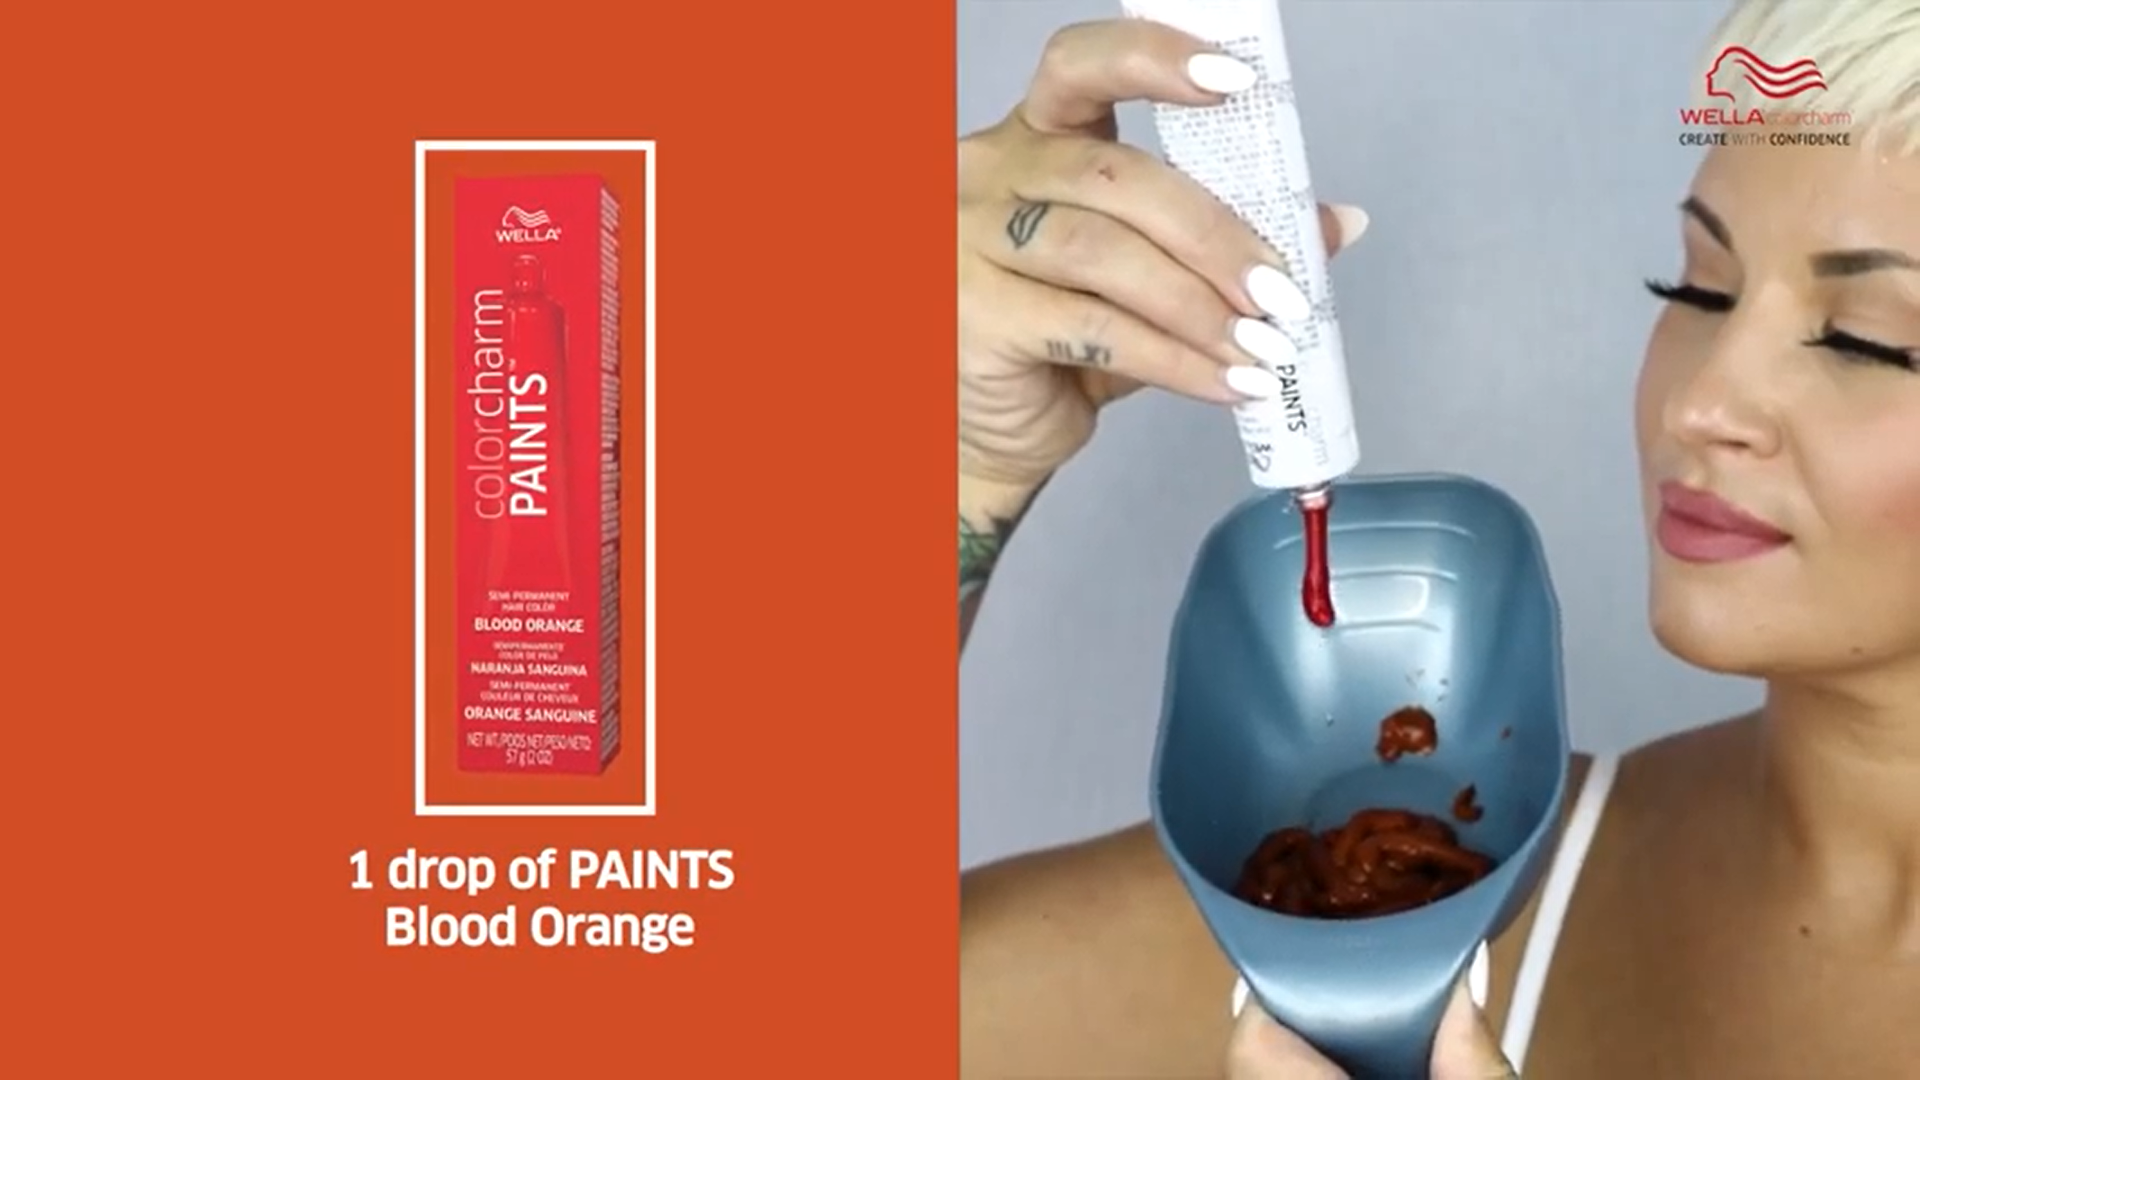 How To Use Wella Colorcharm Paints Blood Orange